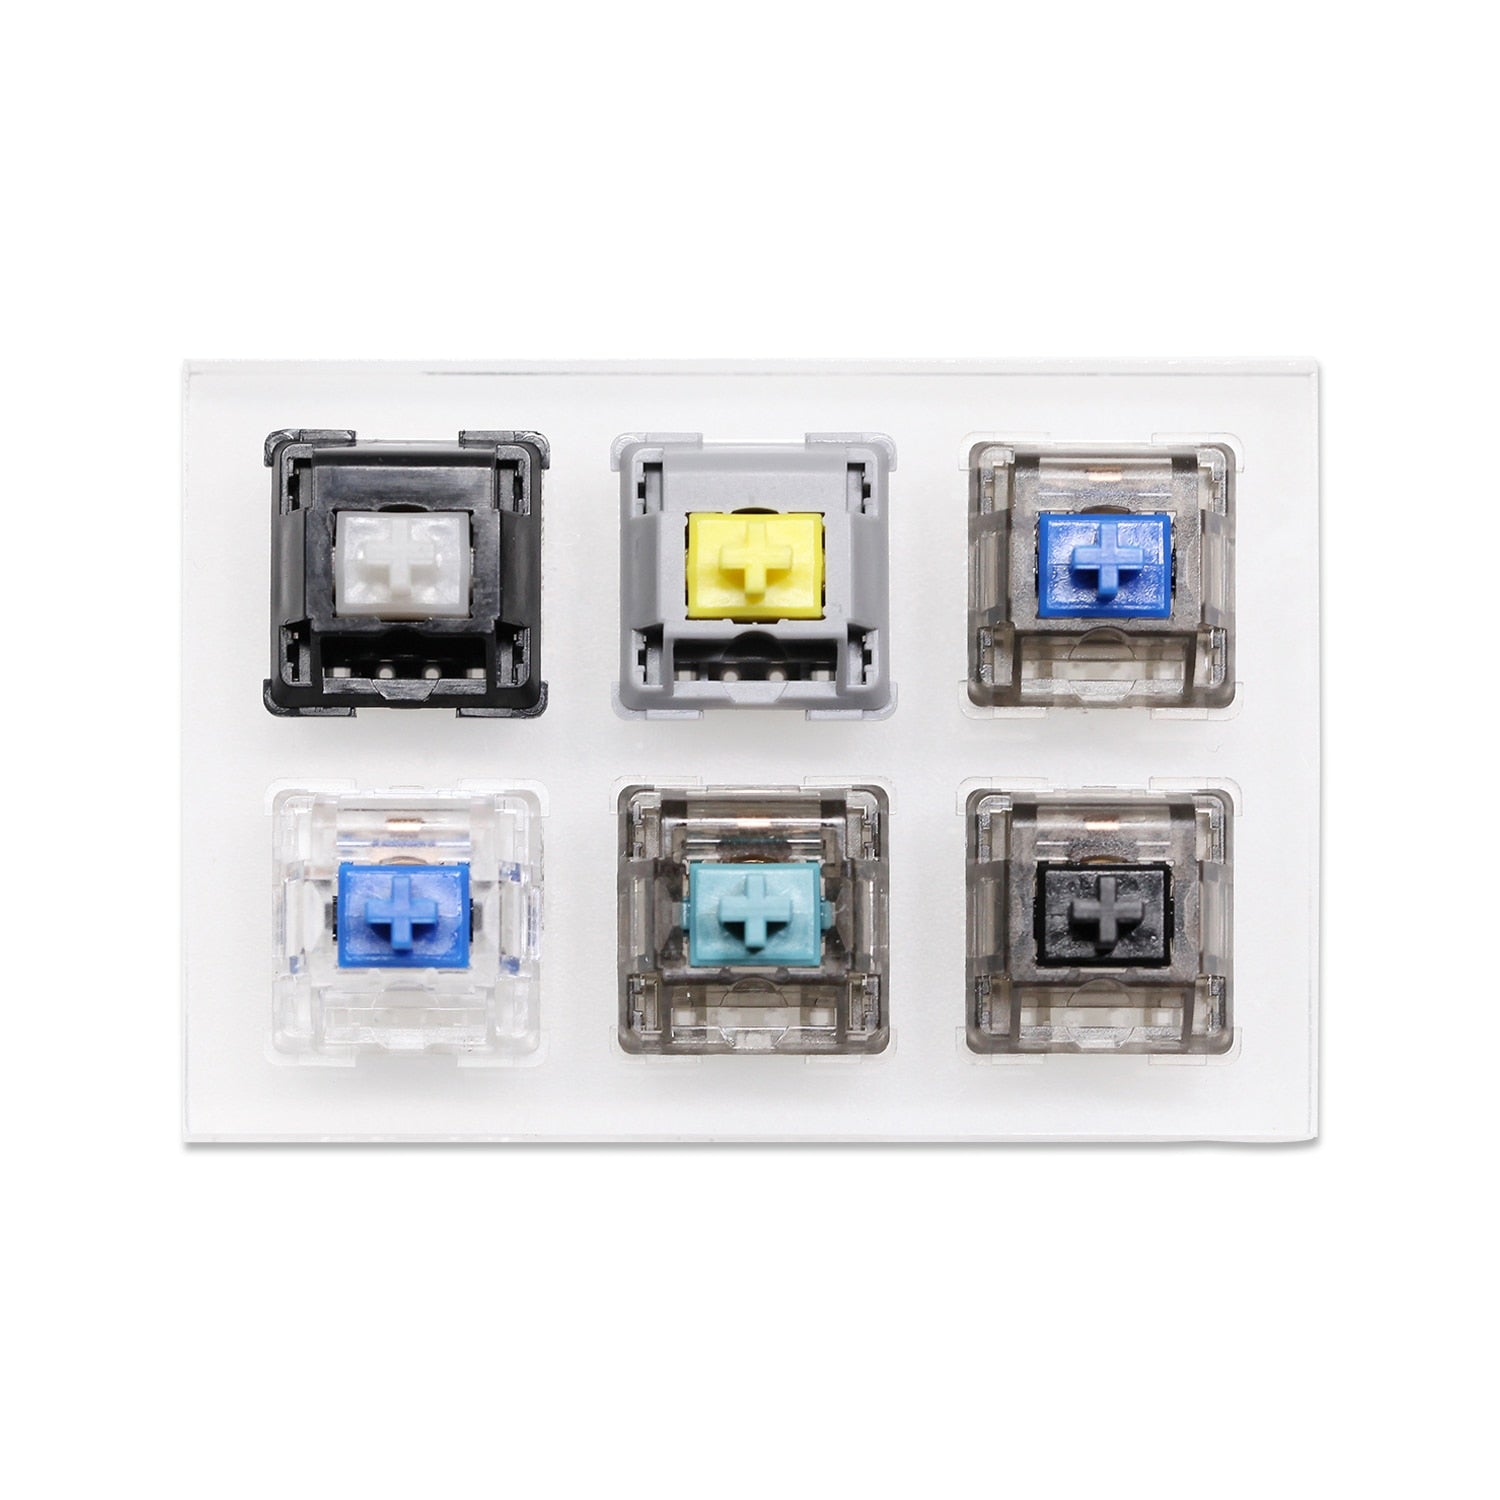 acrylic Switch Tester 4X4 clear housing base for cherry brown black red  blue tactile grey silver green nature white clear rgb